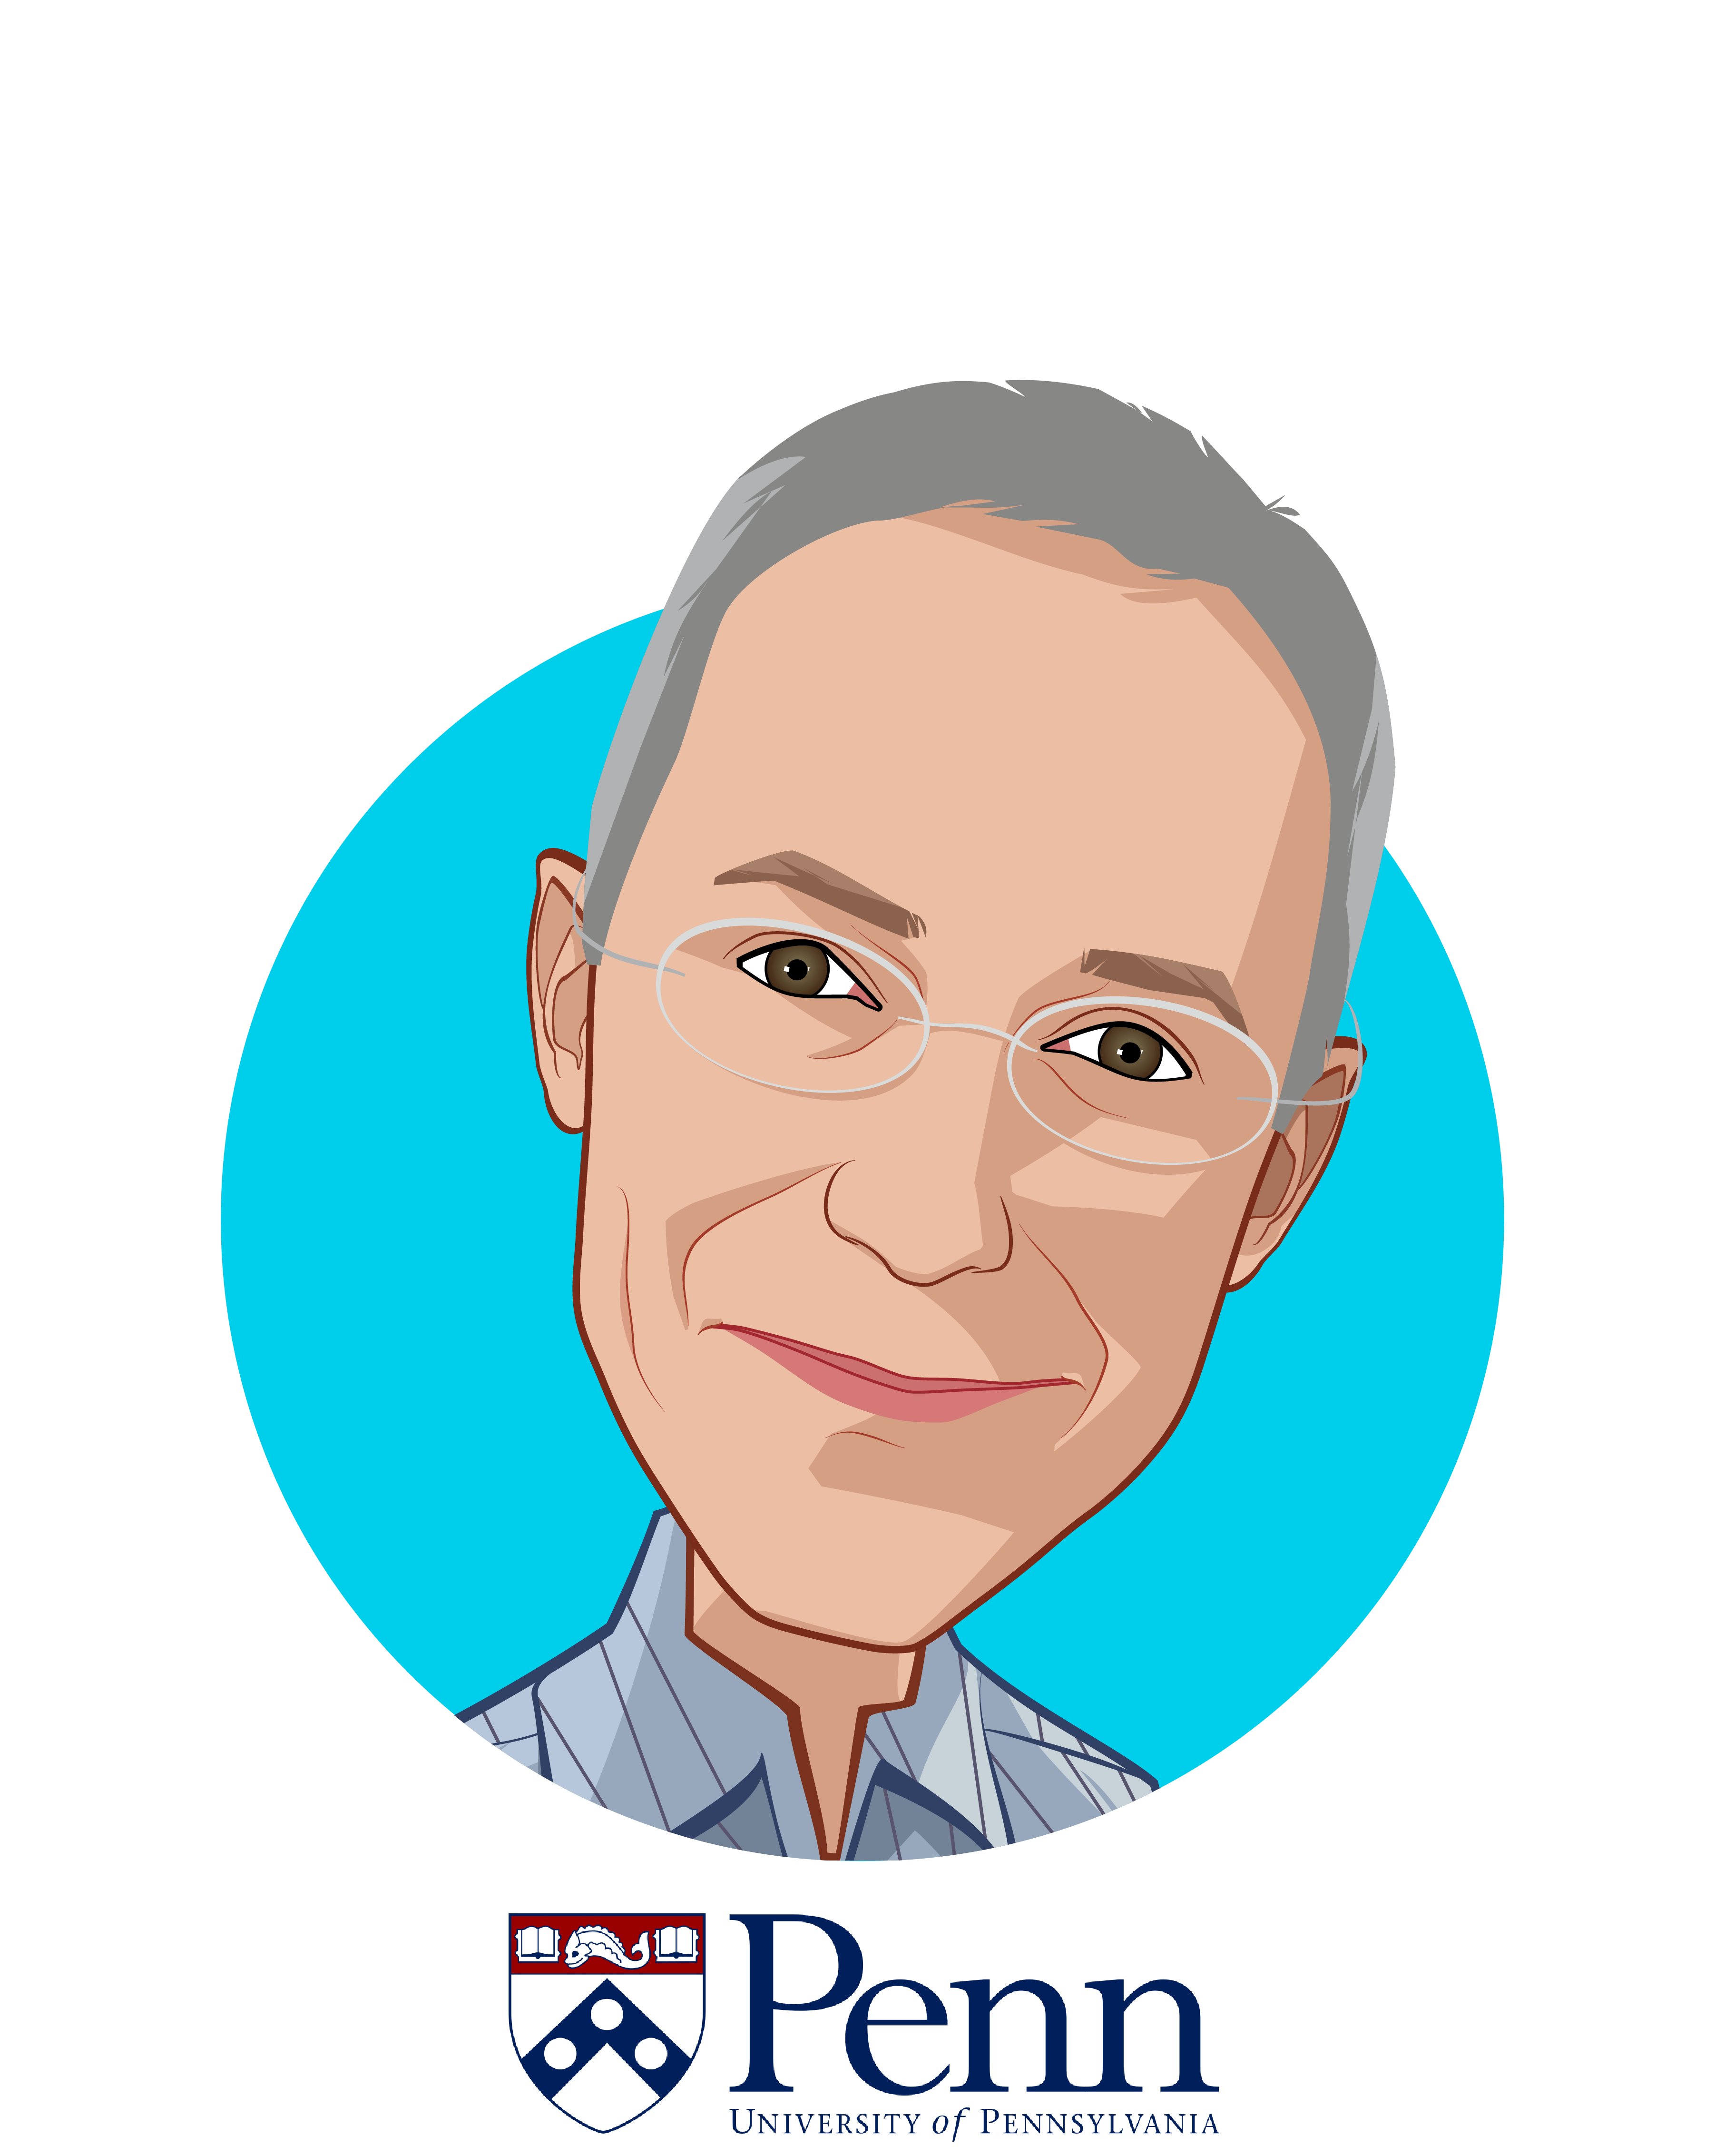 Main caricature of Ezekiel J. Emanuel M.D., Ph.D., who is speaking at HLTH and is Chair, Department of Medical Ethics and Health Policy at University of Pennsylvania